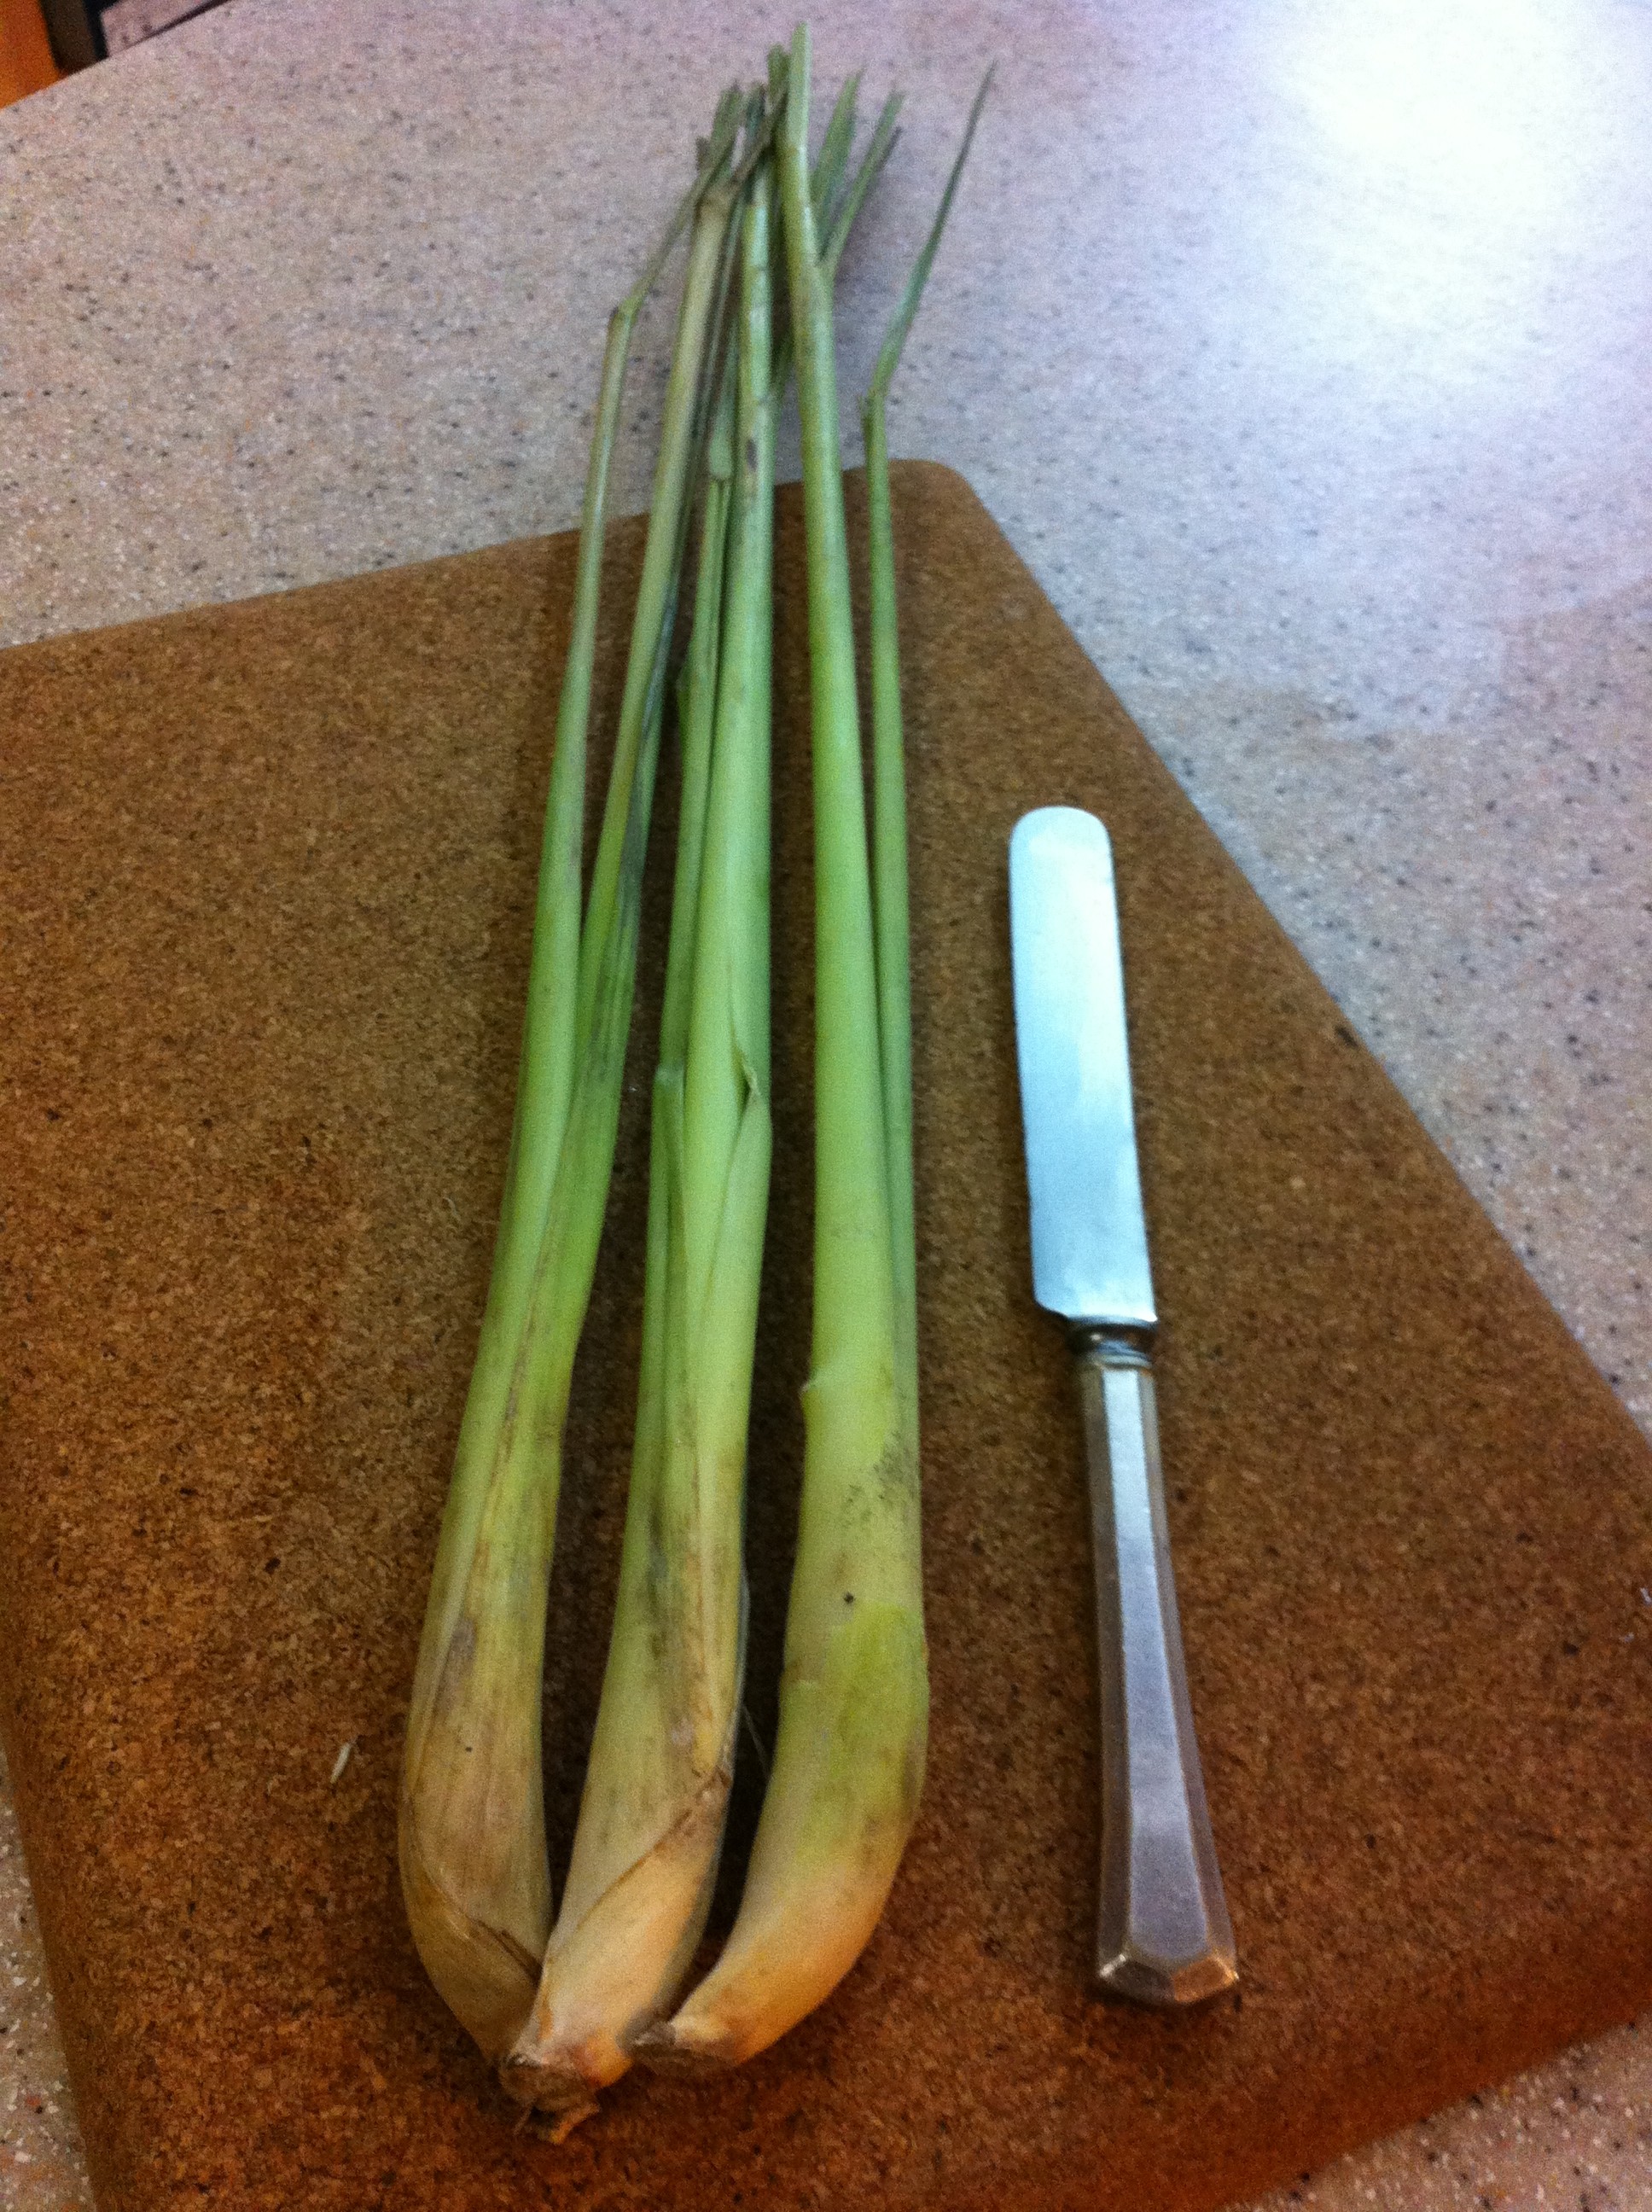 Lemongrass I purchased today, ready for trimming. The butter knife gives you an idea how big the stalks are. 